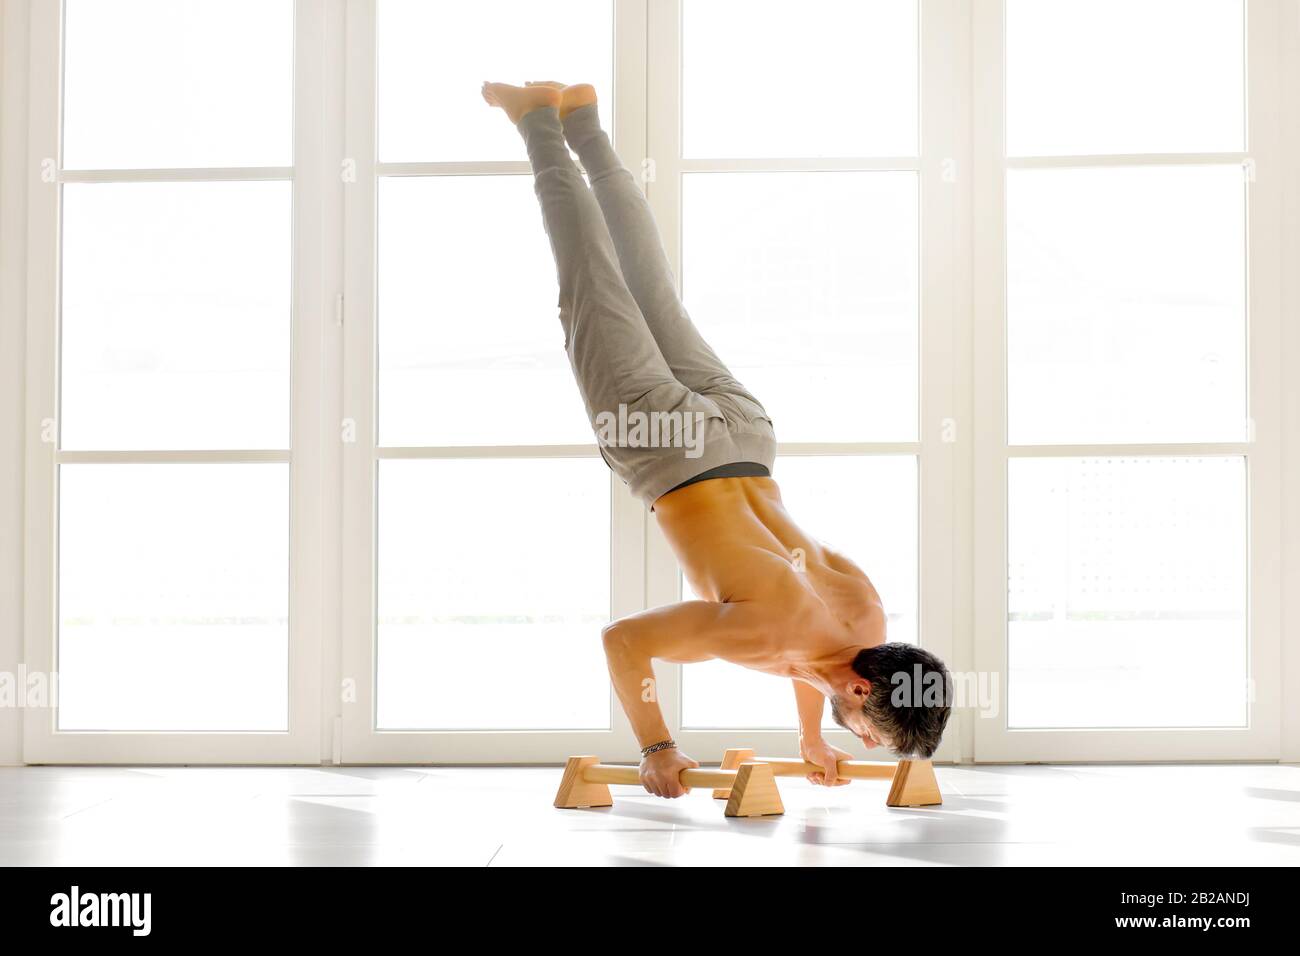 Muscular shirtless man doing power handstand push ups on low bars against bright white windows indoors Stock Photo